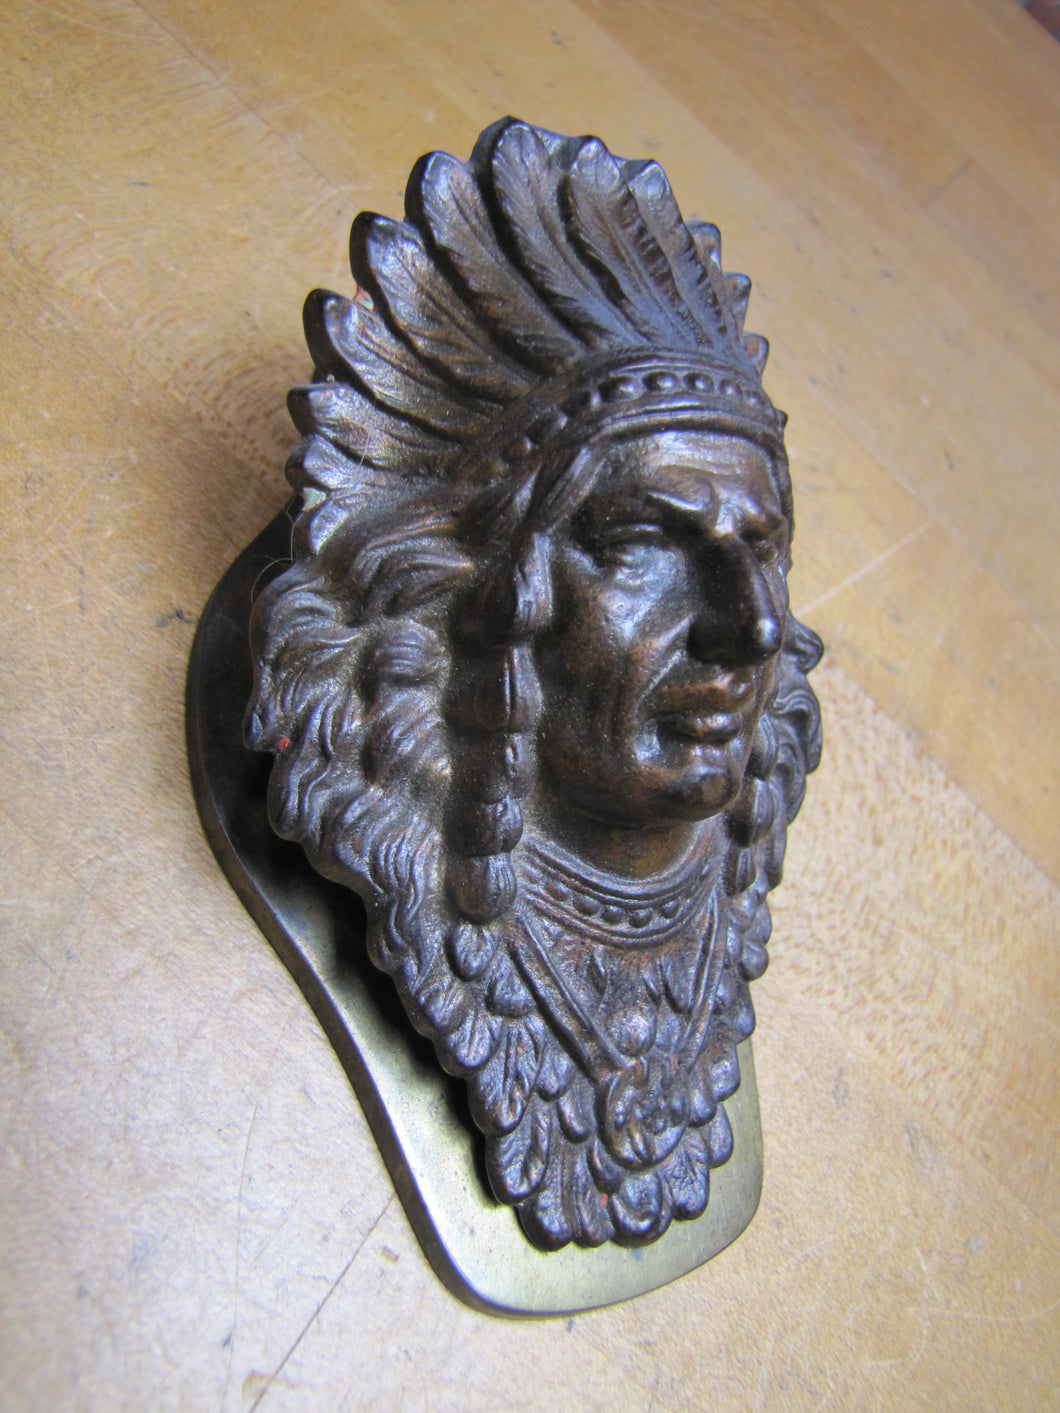 Native American Indian Chief Antique Paper Clip Weight Decorative Arts Judd Mfg 5251 Paperclip Paperweight Desk Art Tool